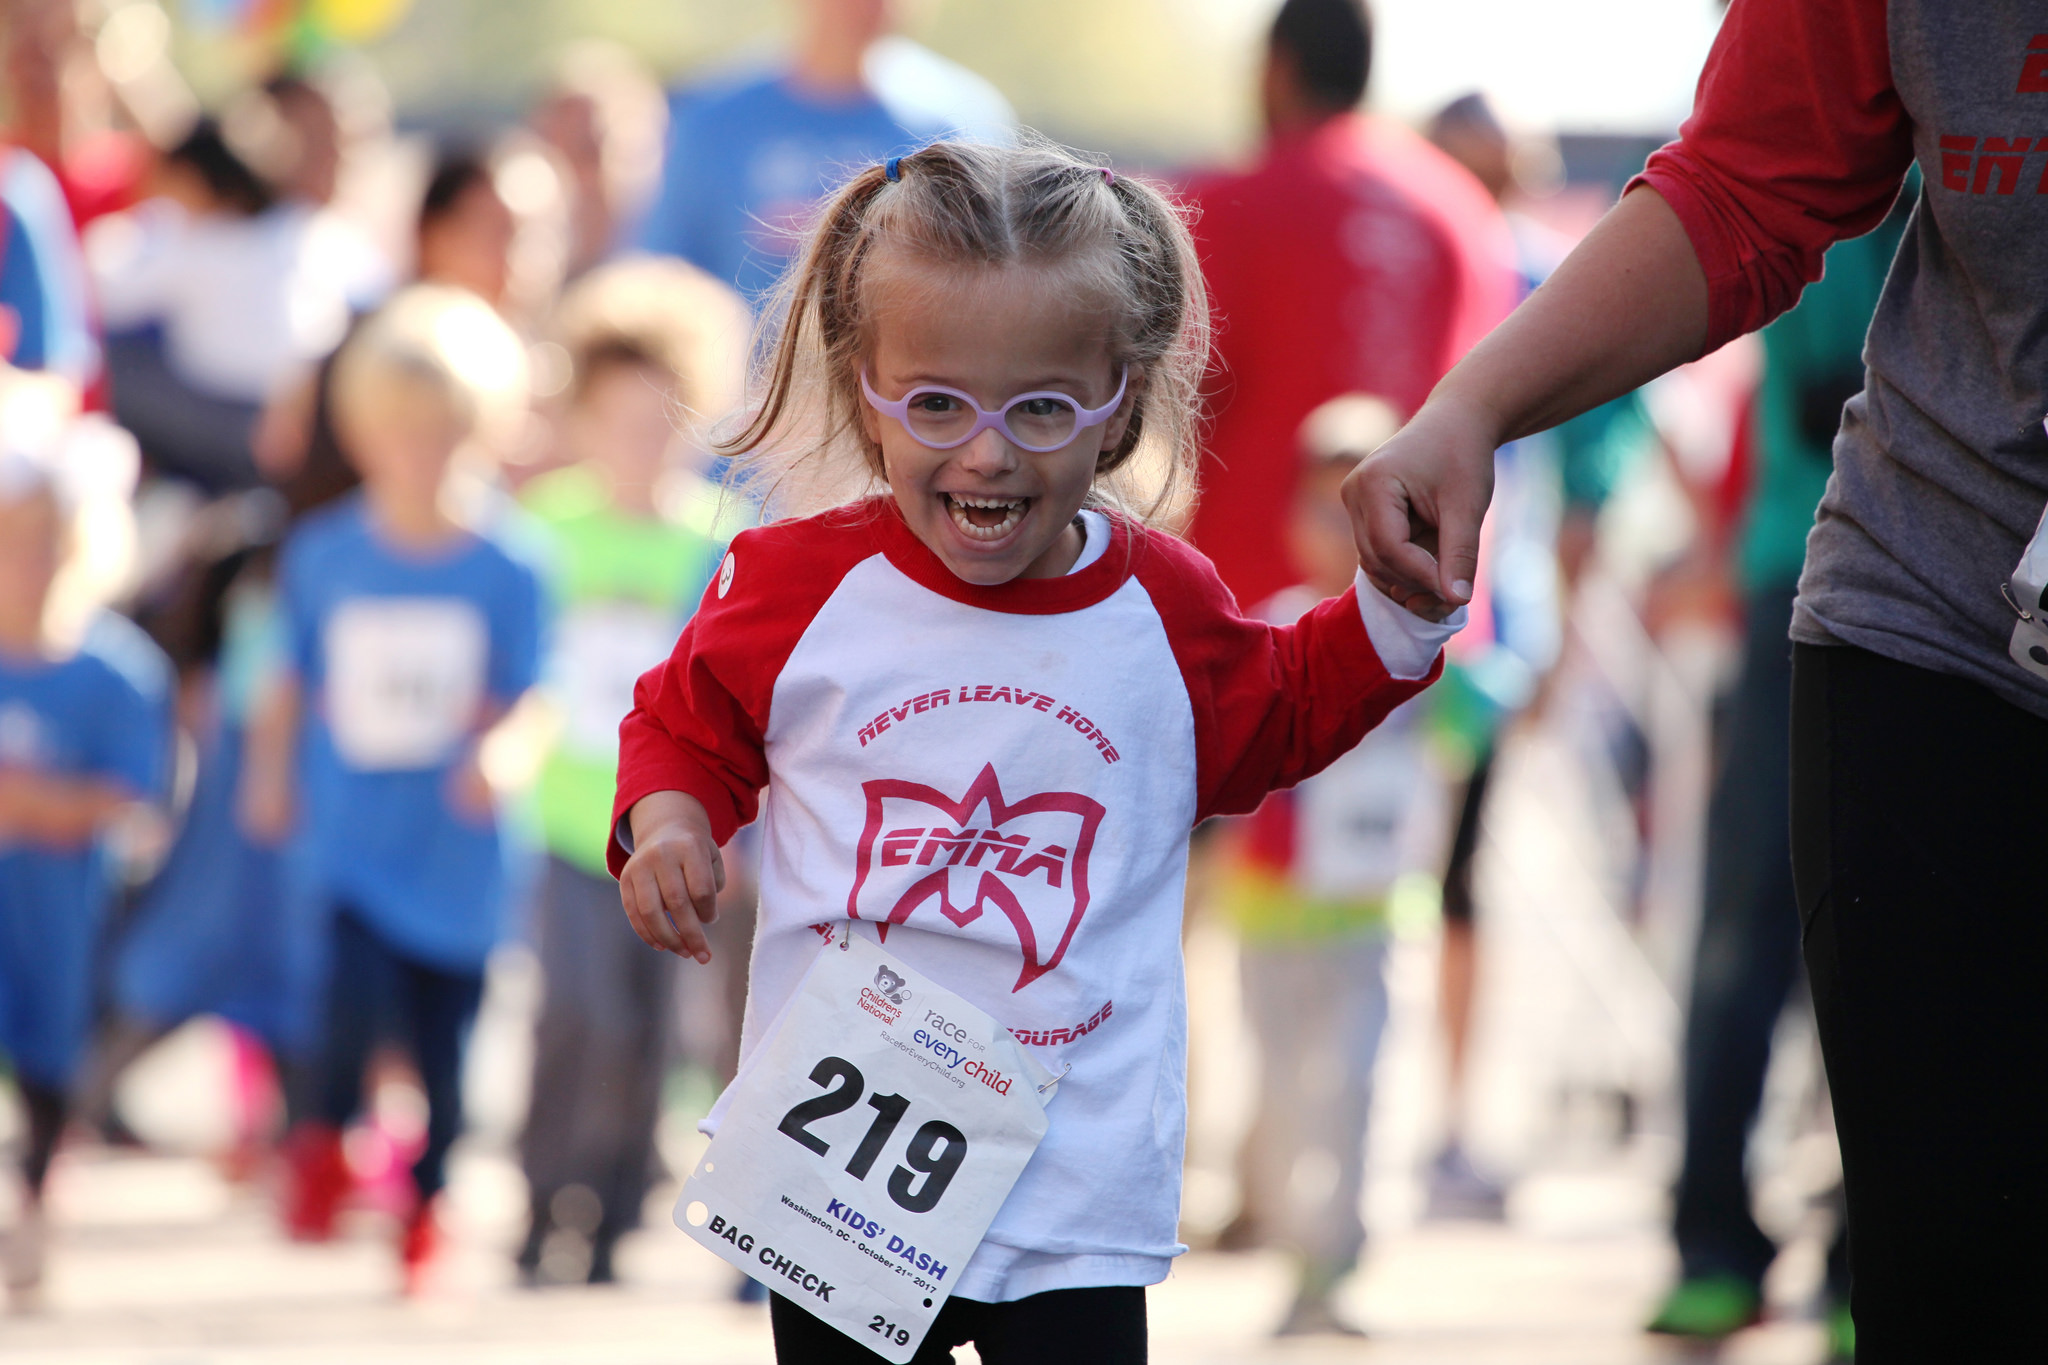 Emma Cirks at the 2017 Race for Every Child